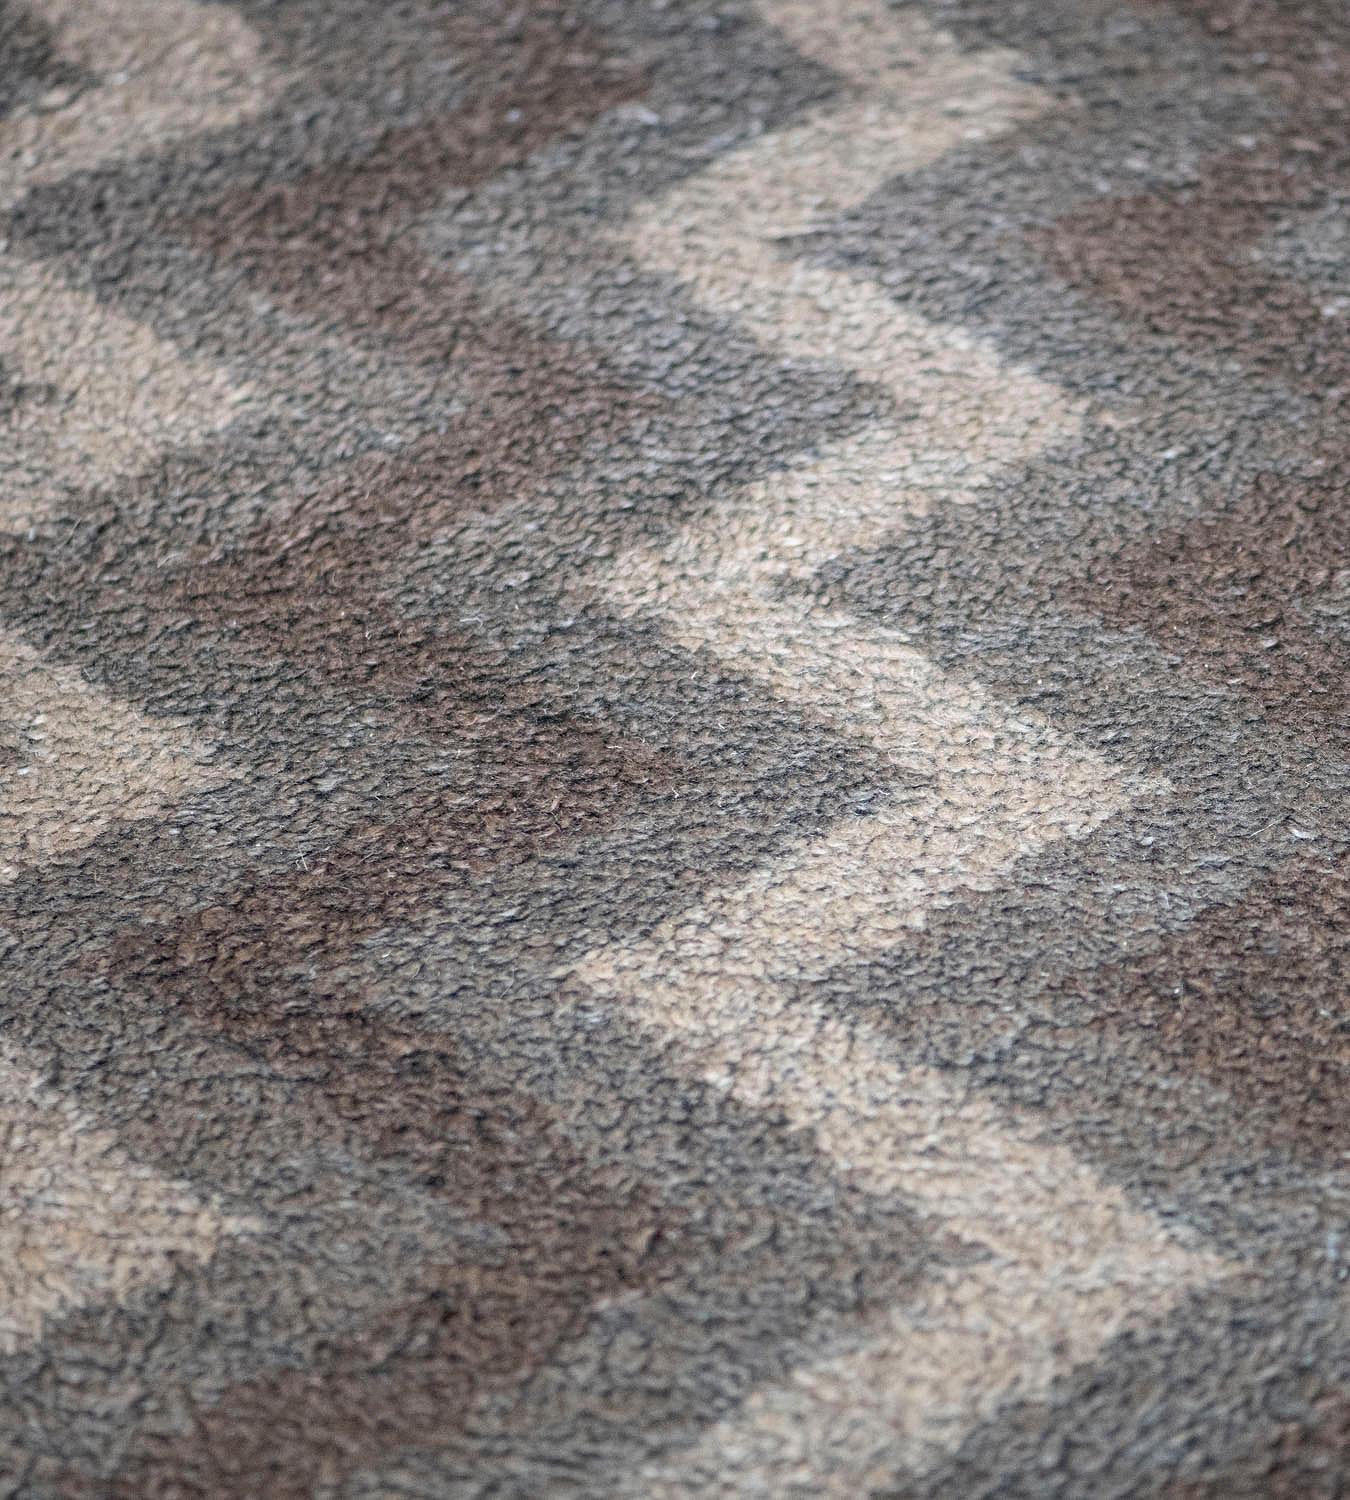 The Mansour Modern collection is primarily inspired by vintage rugs whose geometric designs are relevant as ever in the 21st century. This deep pile mohair rug features alternating ivory, brown, and taupe stripes in a playful vertical zig-zag